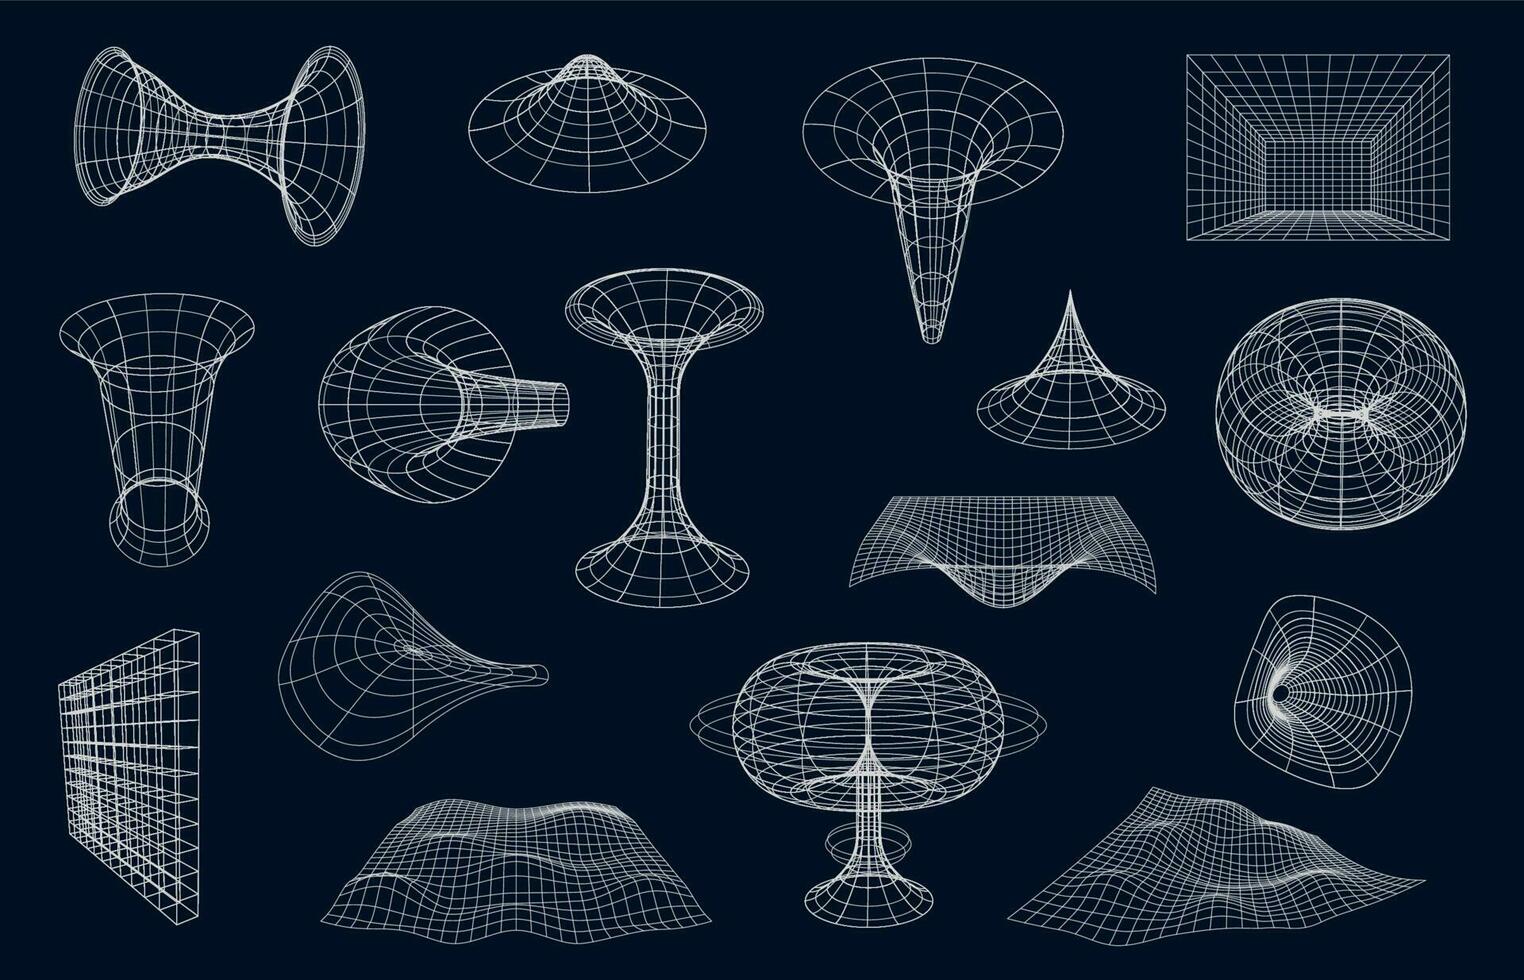 Wireframe geometric shapes, surface grid or sphere vector